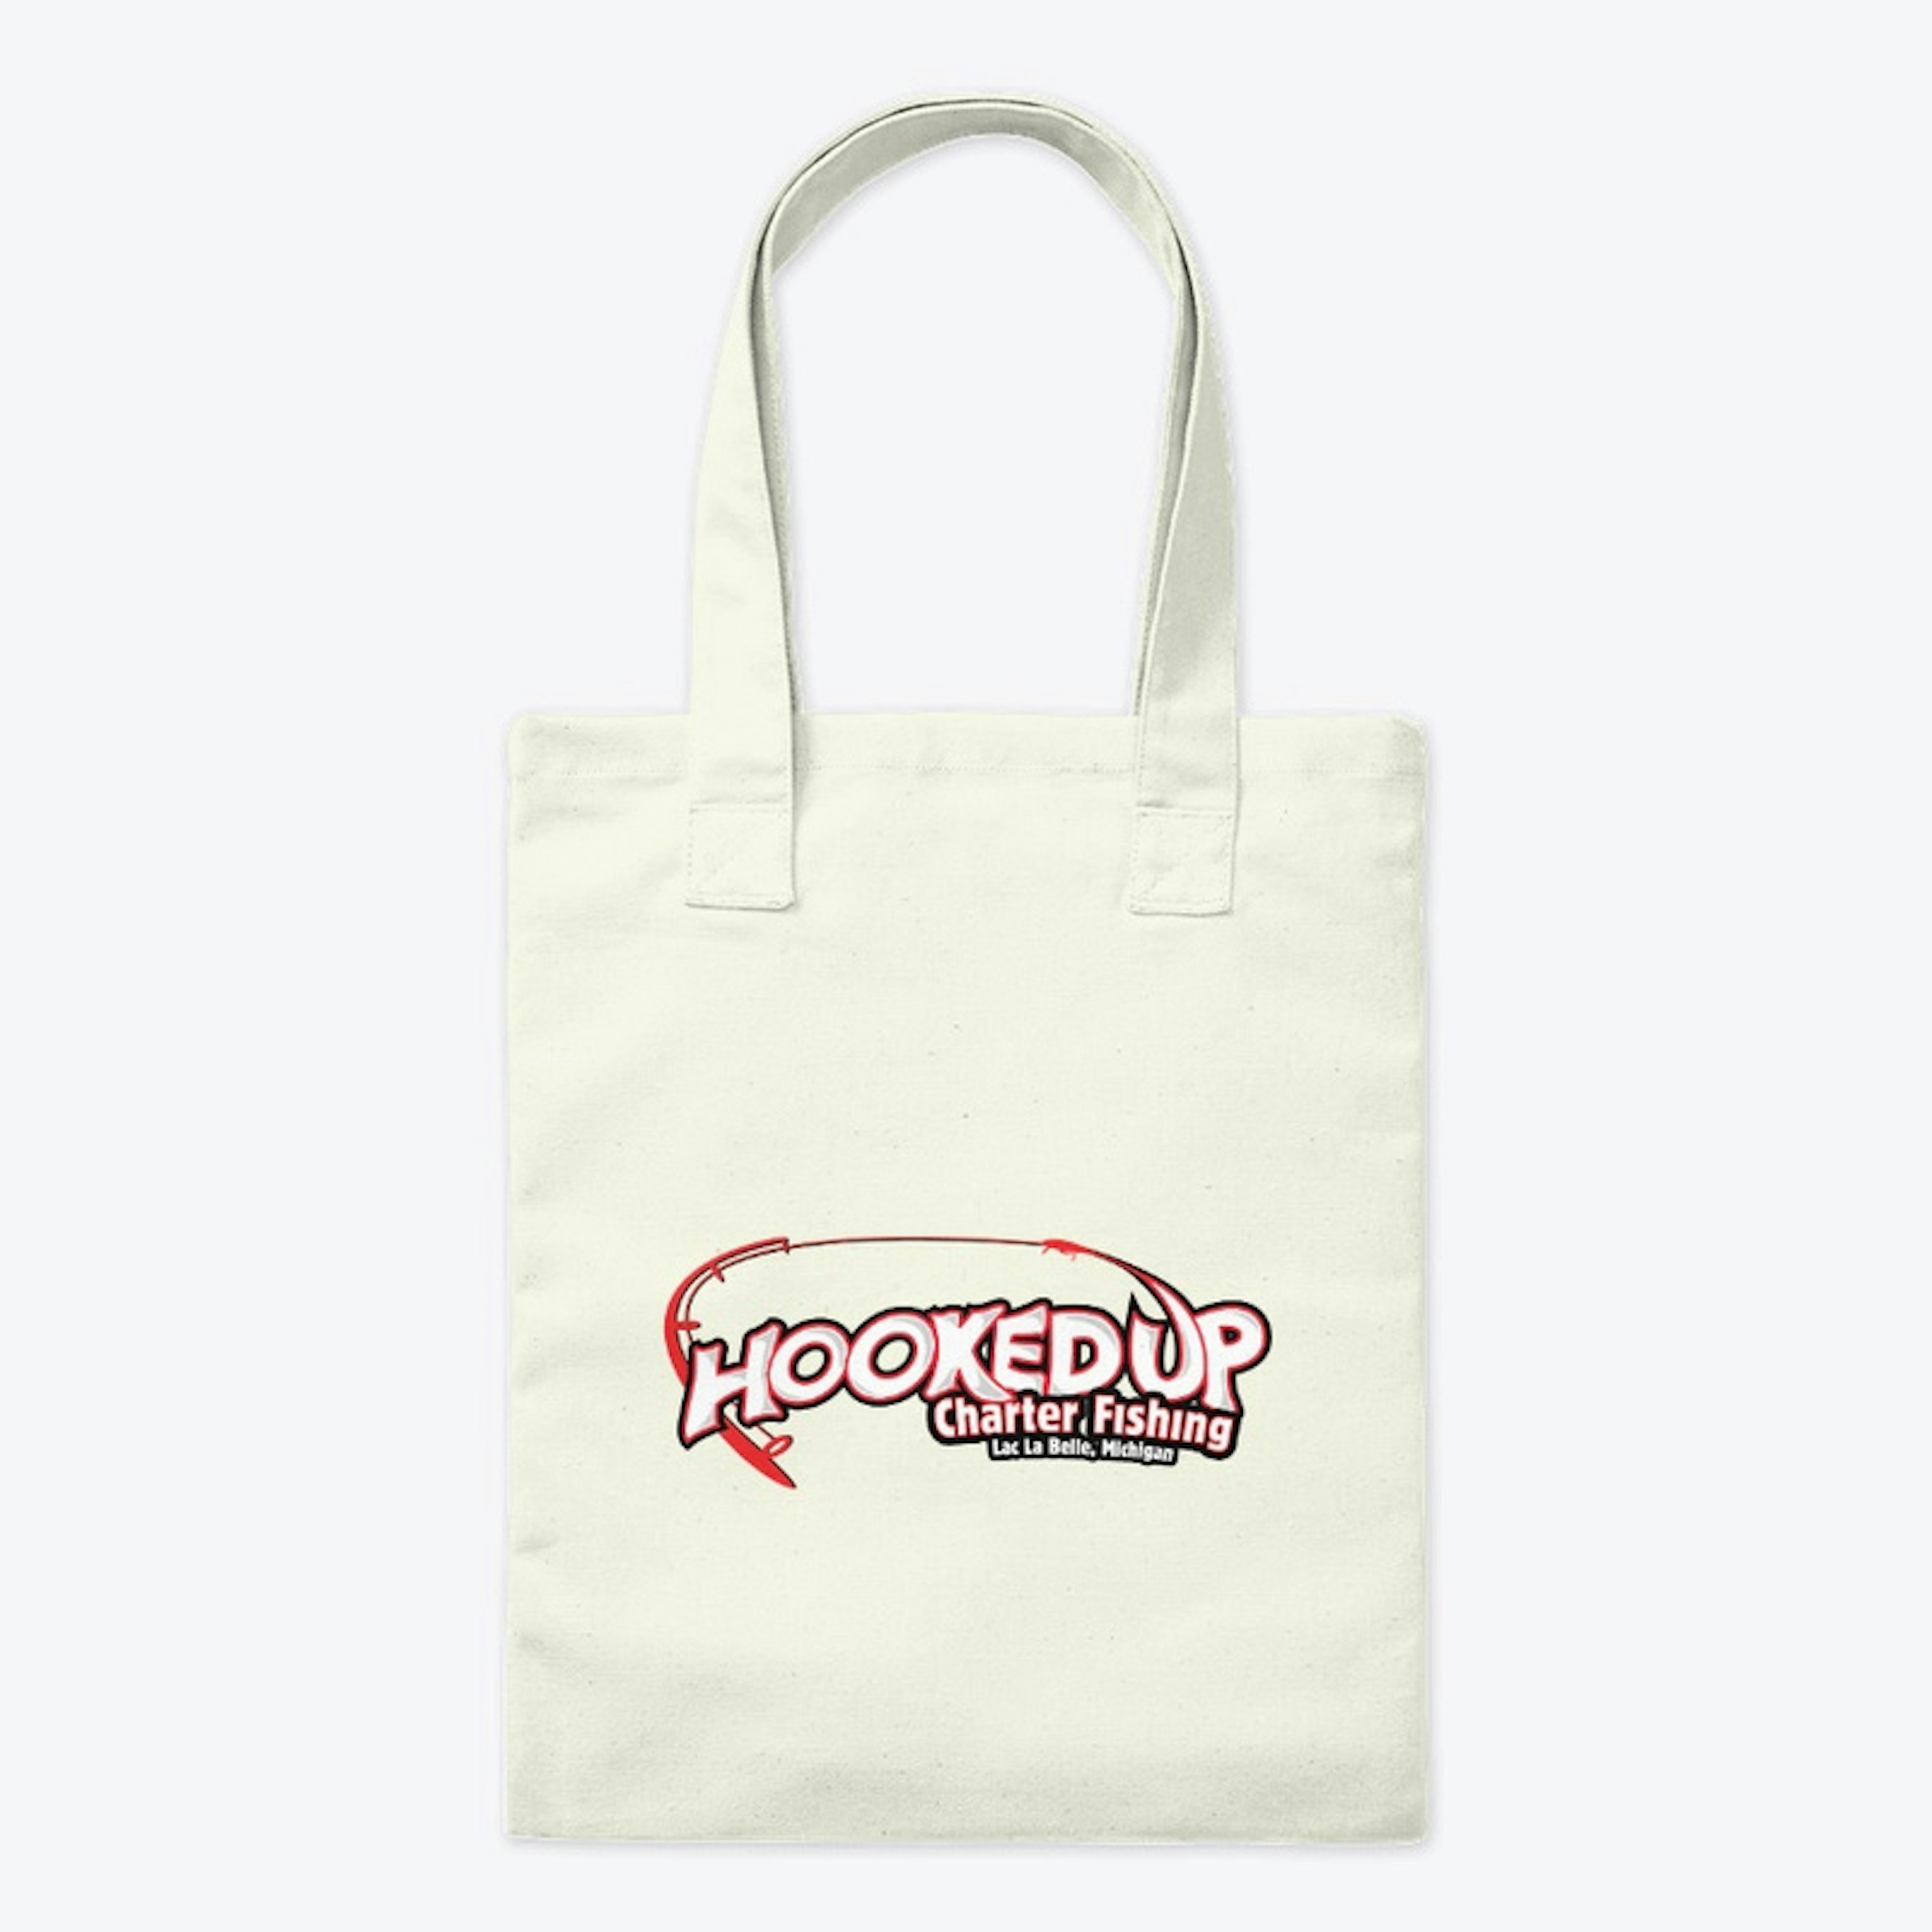 Hooked UP Charter Tote Bag